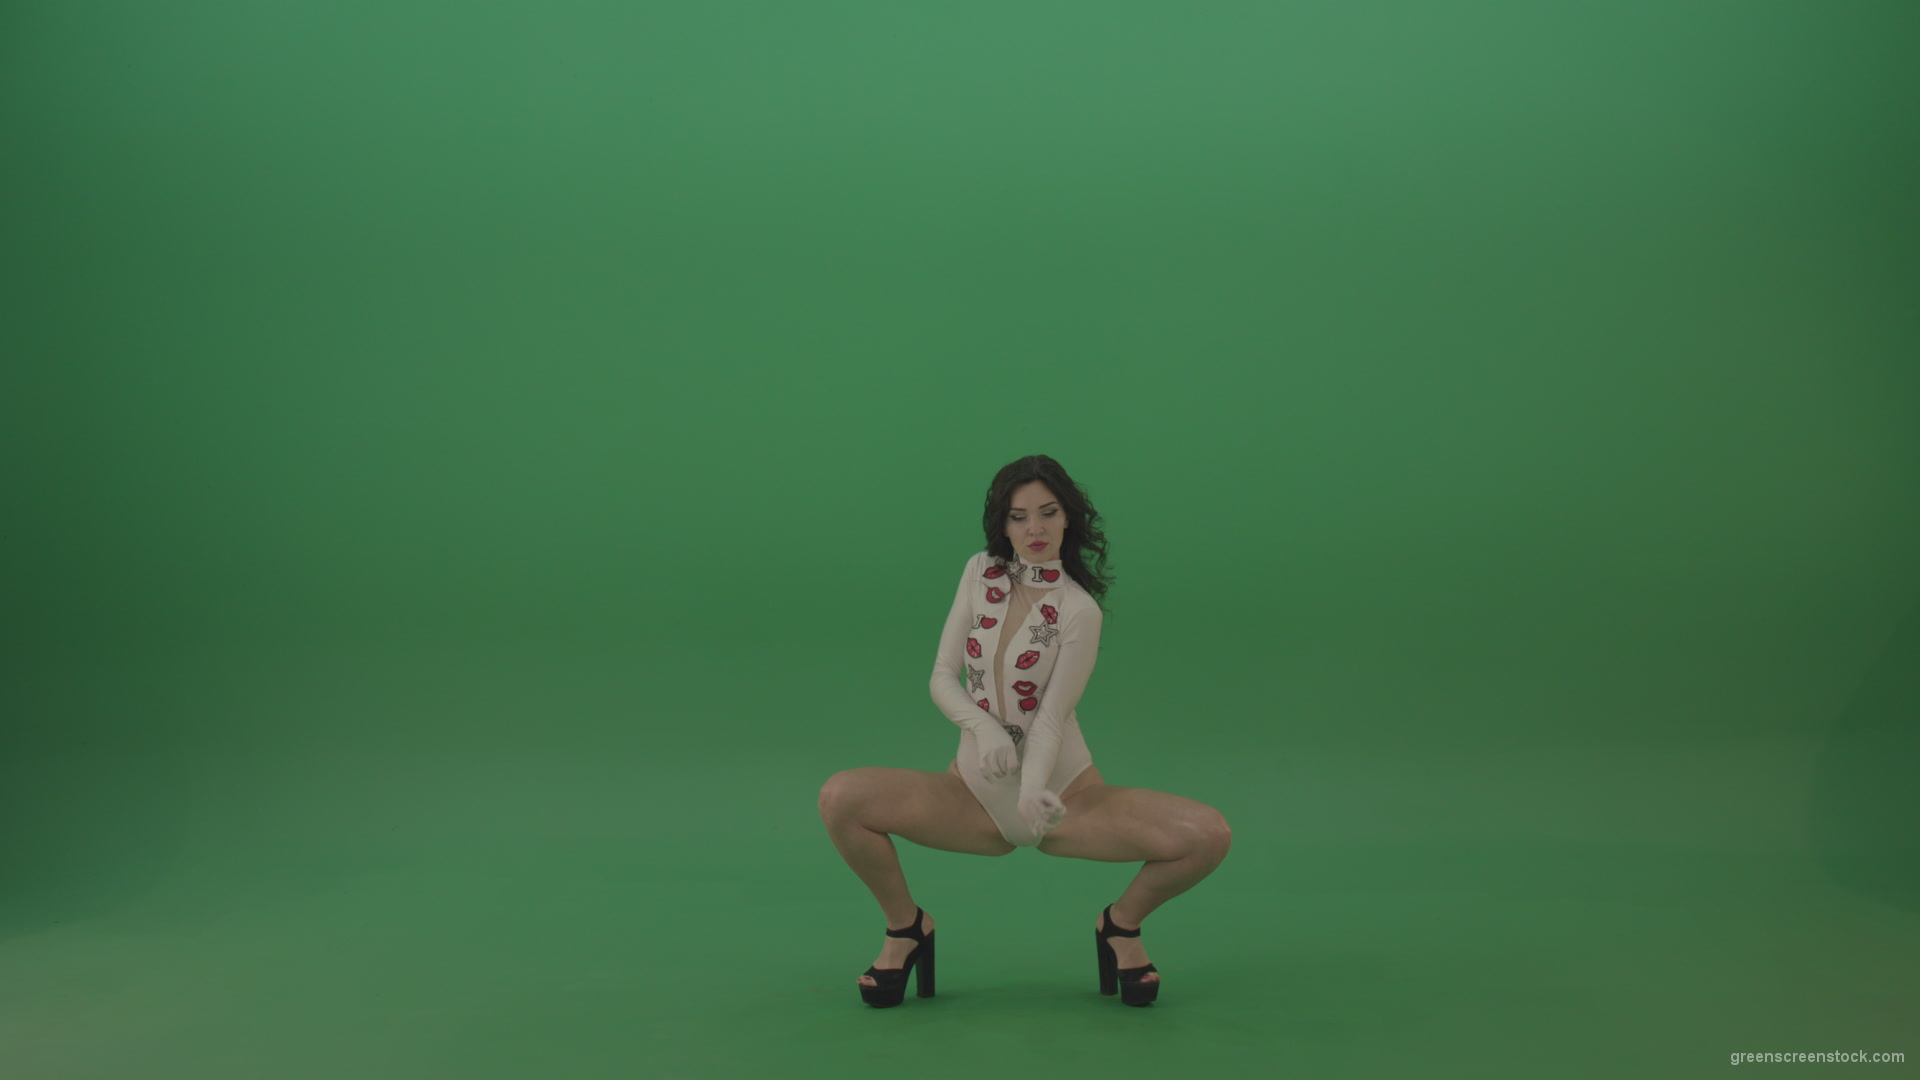 Beautiful-sexy-woman-seductively-elegantly-dancing-in-a-white-body-on-green-screen_007 Green Screen Stock